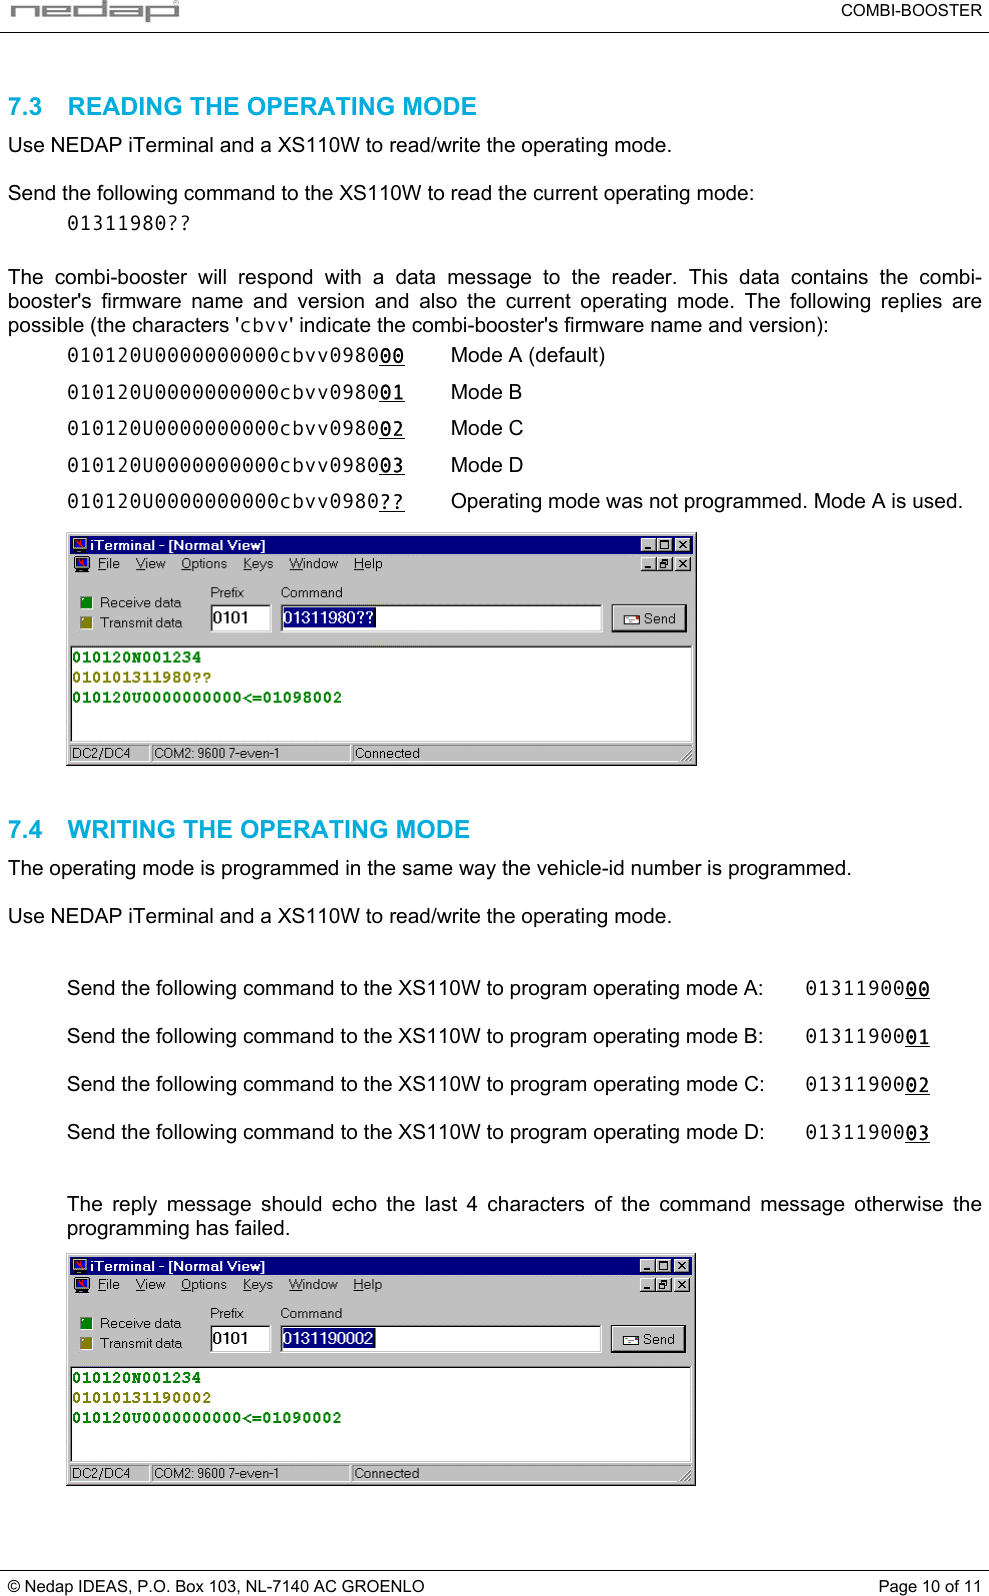   COMBI-BOOSTER © Nedap IDEAS, P.O. Box 103, NL-7140 AC GROENLO  Page 10 of 11 7.3  READING THE OPERATING MODE Use NEDAP iTerminal and a XS110W to read/write the operating mode.  Send the following command to the XS110W to read the current operating mode: 01311980??  The combi-booster will respond with a data message to the reader. This data contains the combi-booster&apos;s firmware name and version and also the current operating mode. The following replies are possible (the characters &apos;cbvv&apos; indicate the combi-booster&apos;s firmware name and version): 010120U0000000000cbvv098000  Mode A (default) 010120U0000000000cbvv098001 Mode B 010120U0000000000cbvv098002 Mode C 010120U0000000000cbvv098003 Mode D 010120U0000000000cbvv0980?? Operating mode was not programmed. Mode A is used.   7.4  WRITING THE OPERATING MODE The operating mode is programmed in the same way the vehicle-id number is programmed.  Use NEDAP iTerminal and a XS110W to read/write the operating mode.   Send the following command to the XS110W to program operating mode A:  0131190000  Send the following command to the XS110W to program operating mode B:  0131190001  Send the following command to the XS110W to program operating mode C:  0131190002  Send the following command to the XS110W to program operating mode D:  0131190003   The reply message should echo the last 4 characters of the command message otherwise the programming has failed.   